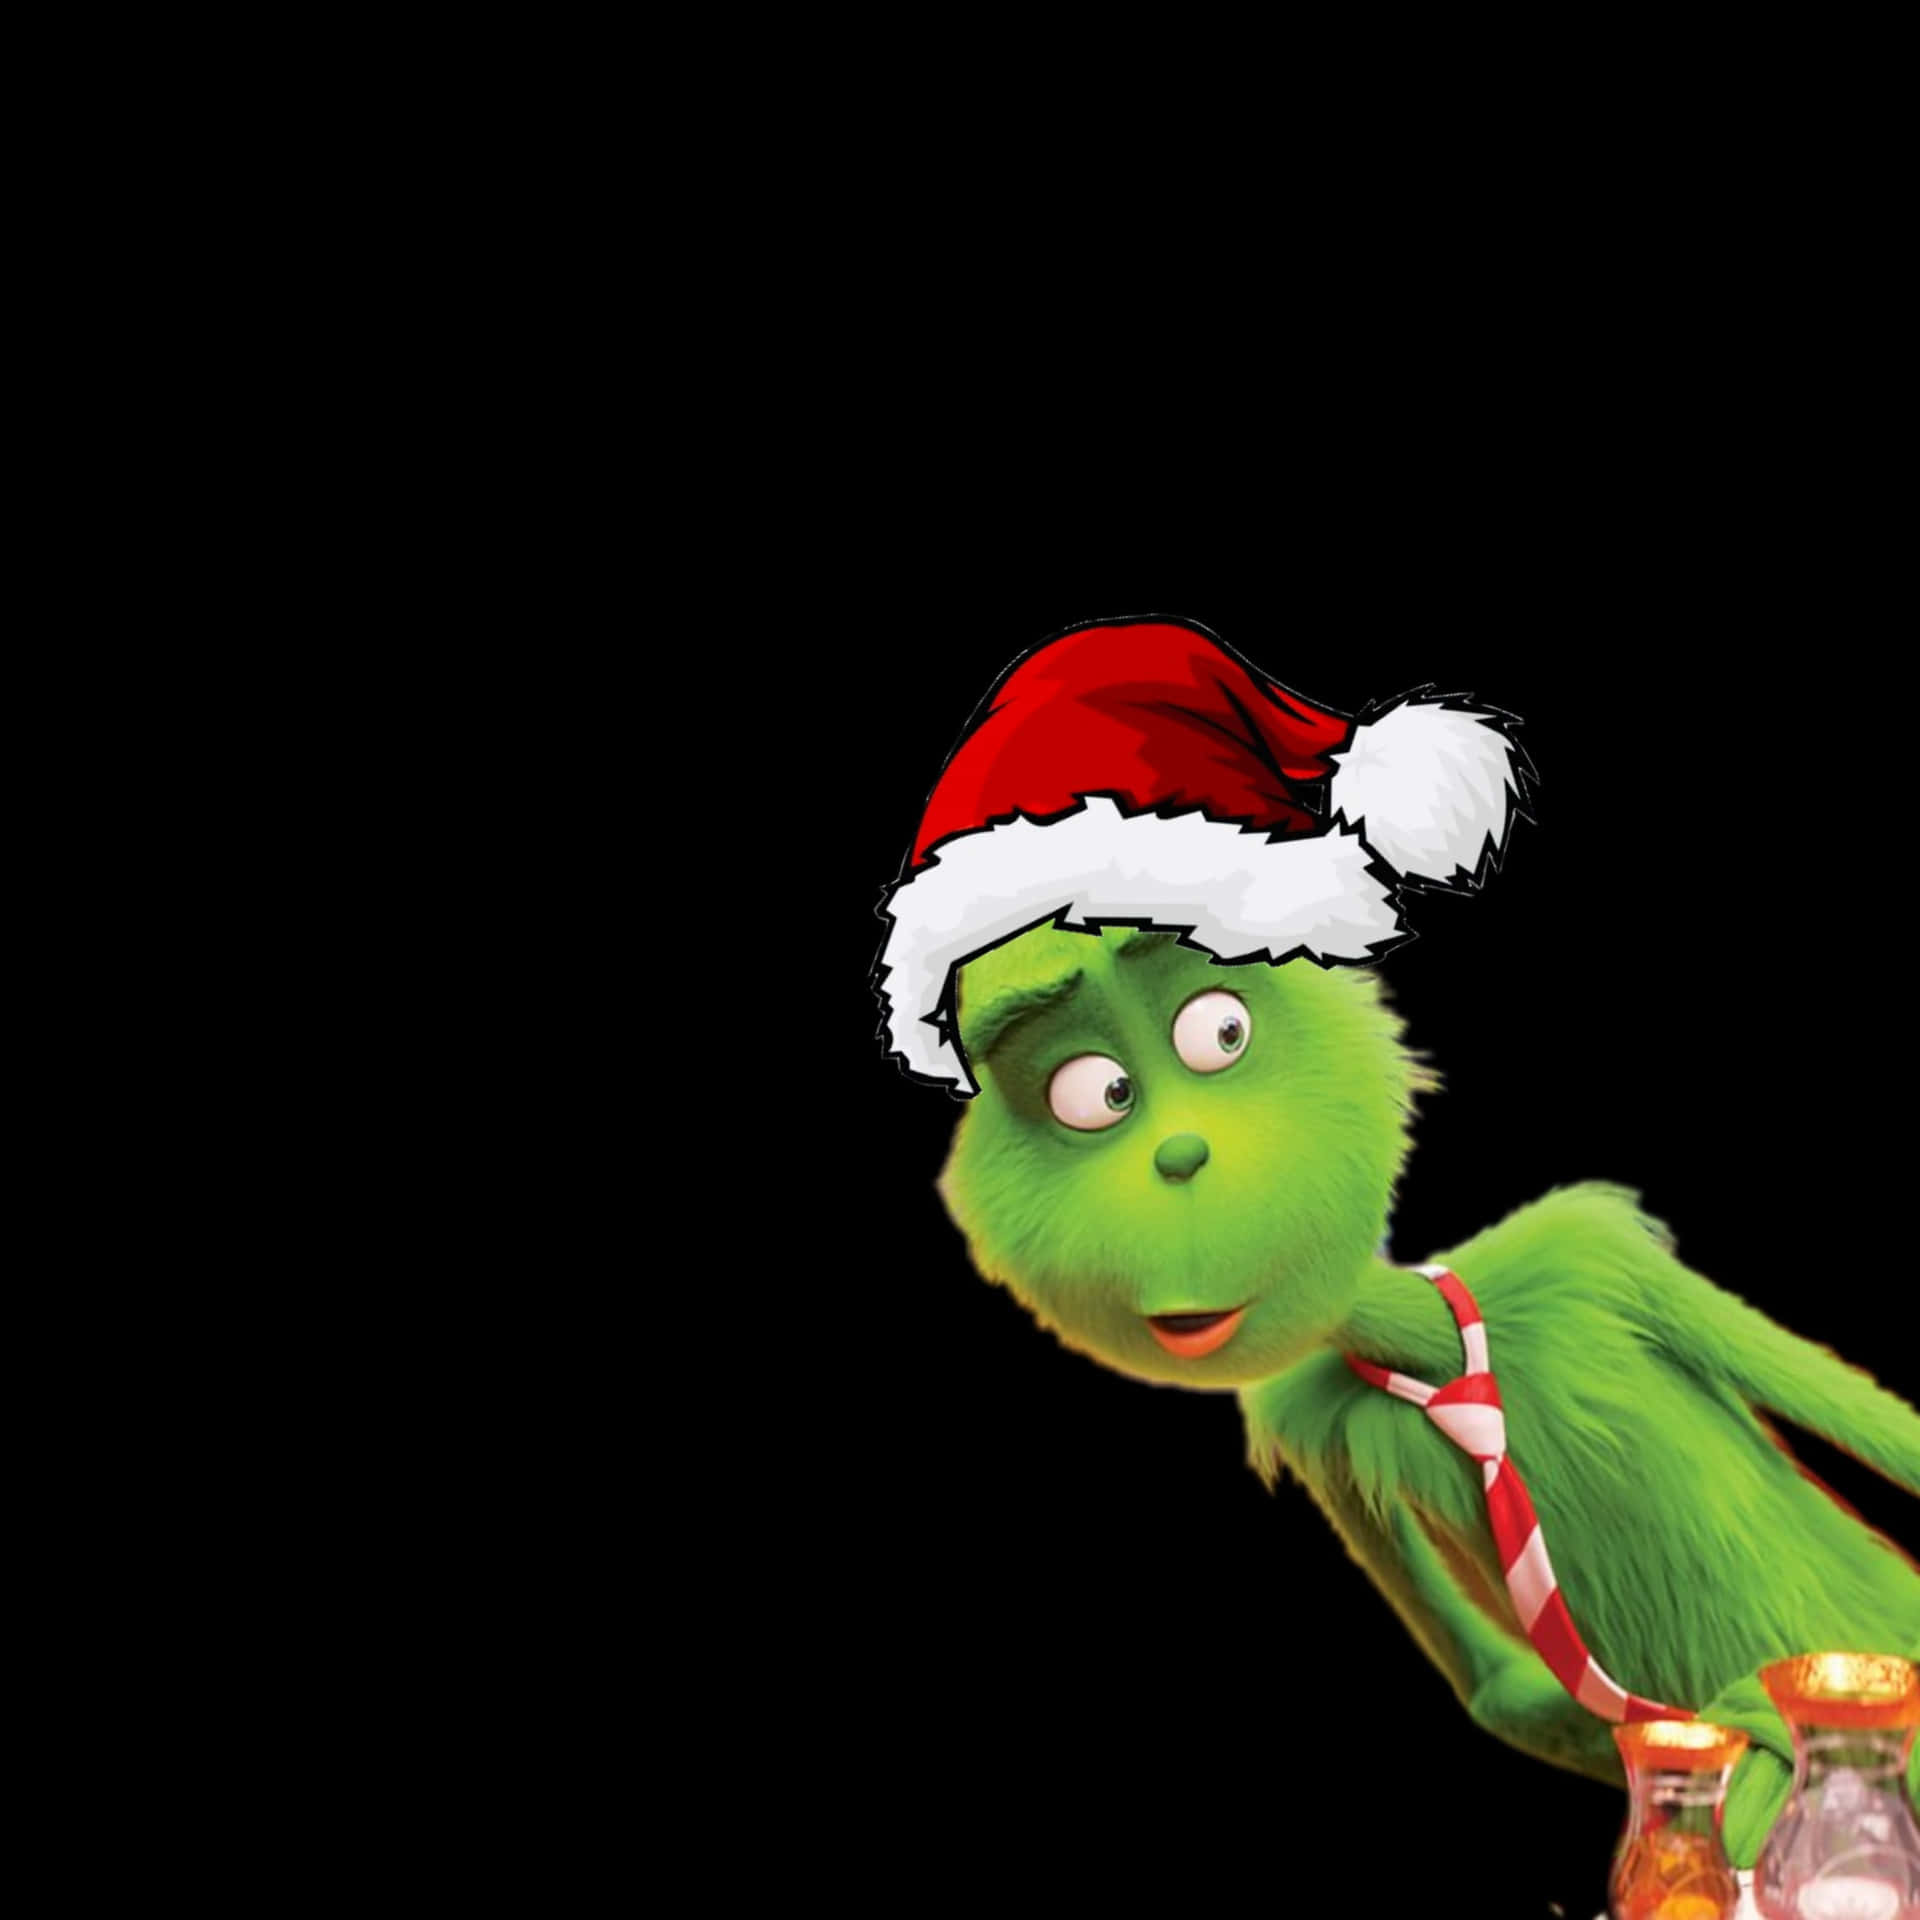 The Grinch In Snowfall With Christmas Vibe.